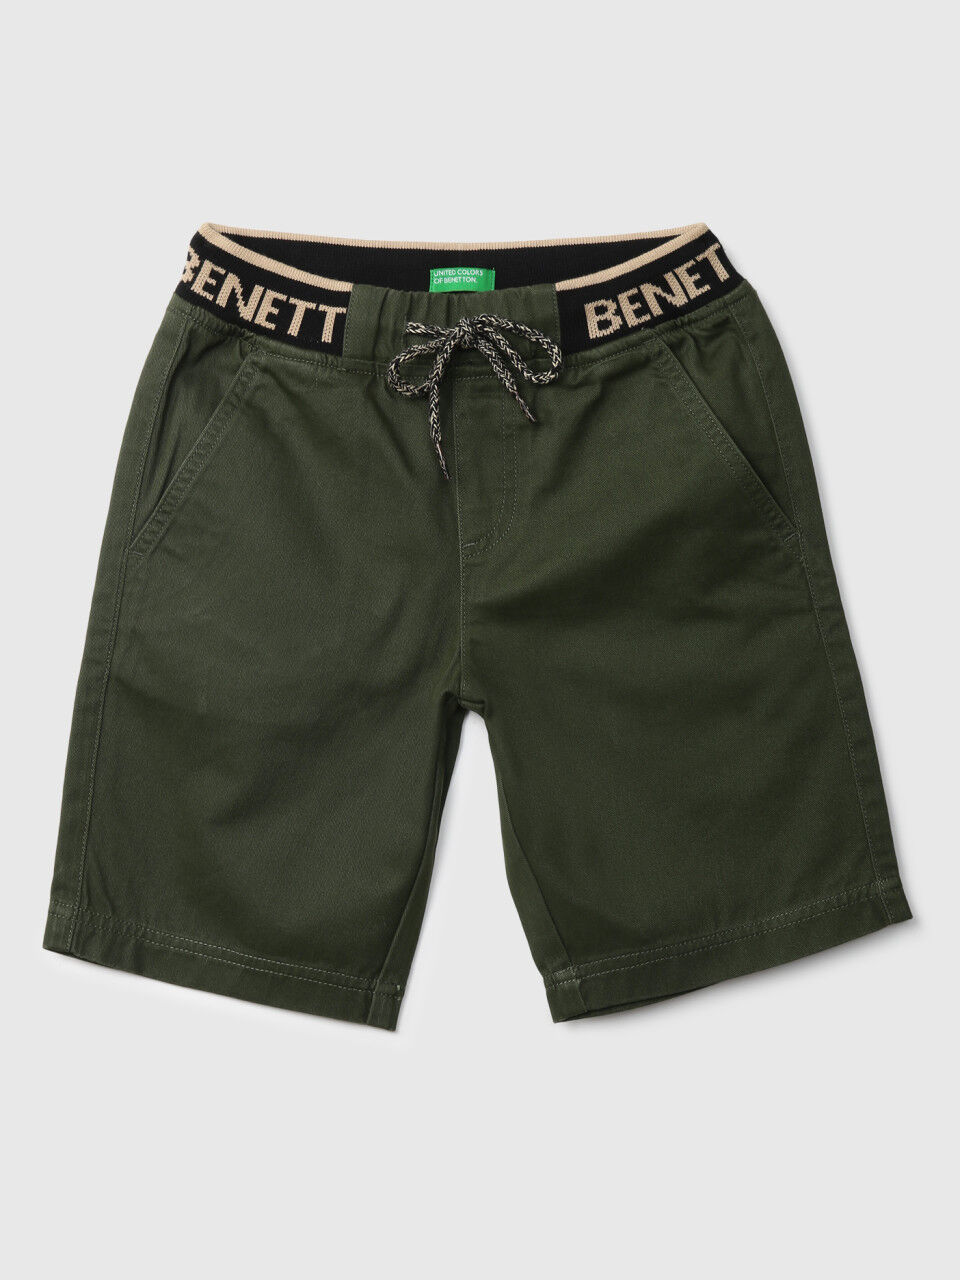 United Colors Of Benetton Boys Woven Solid Shorts